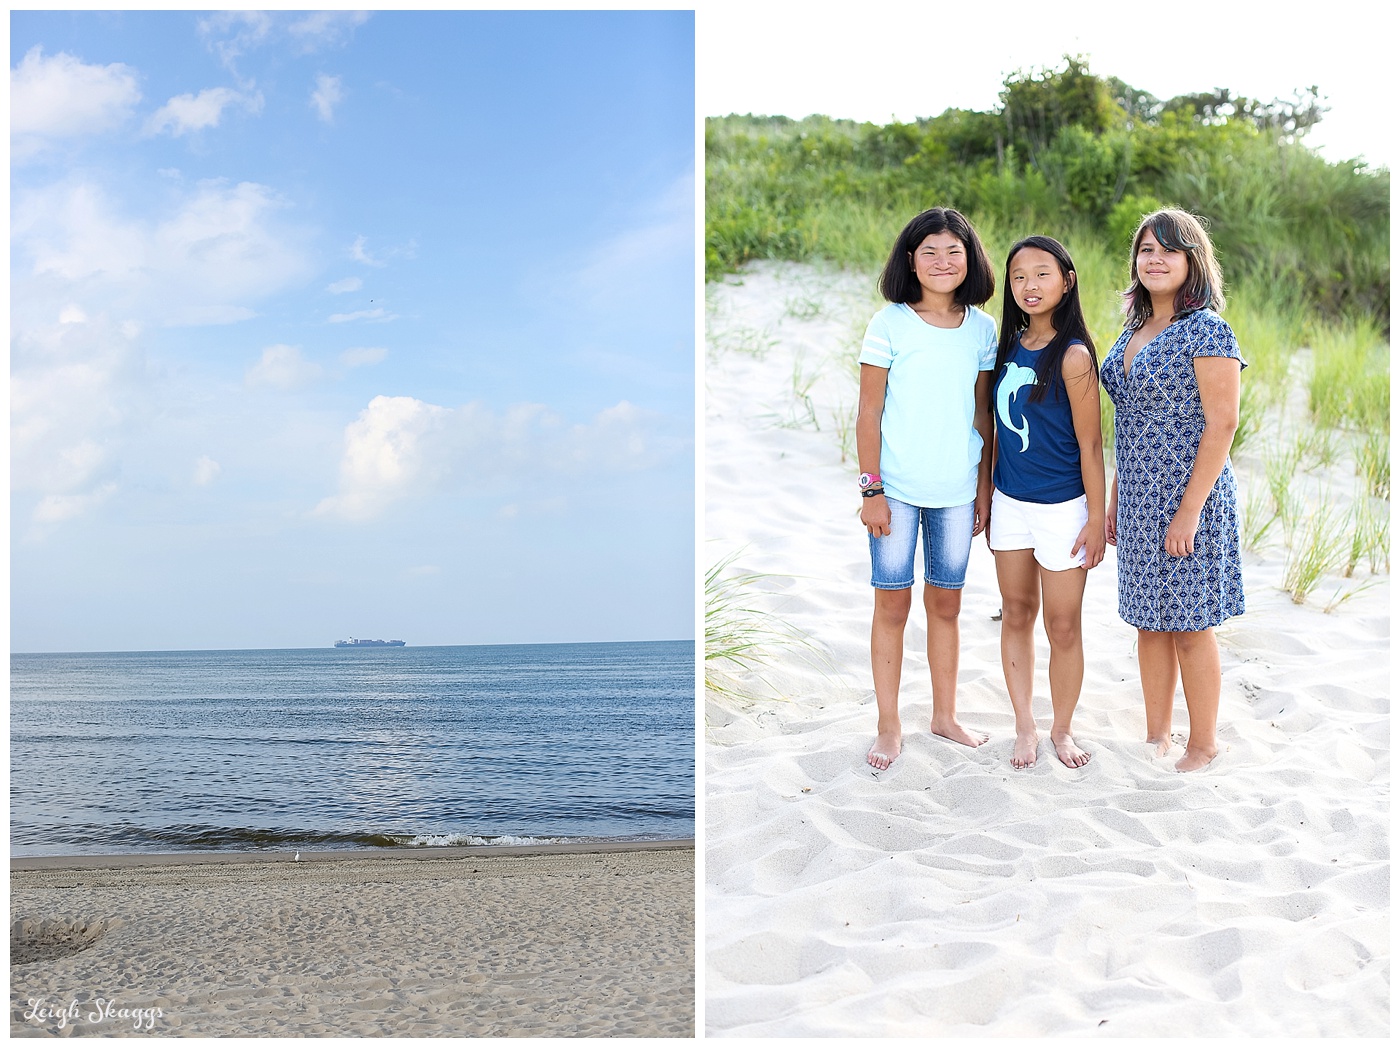 Fin and her Friends take on Ocean View Virginia!  